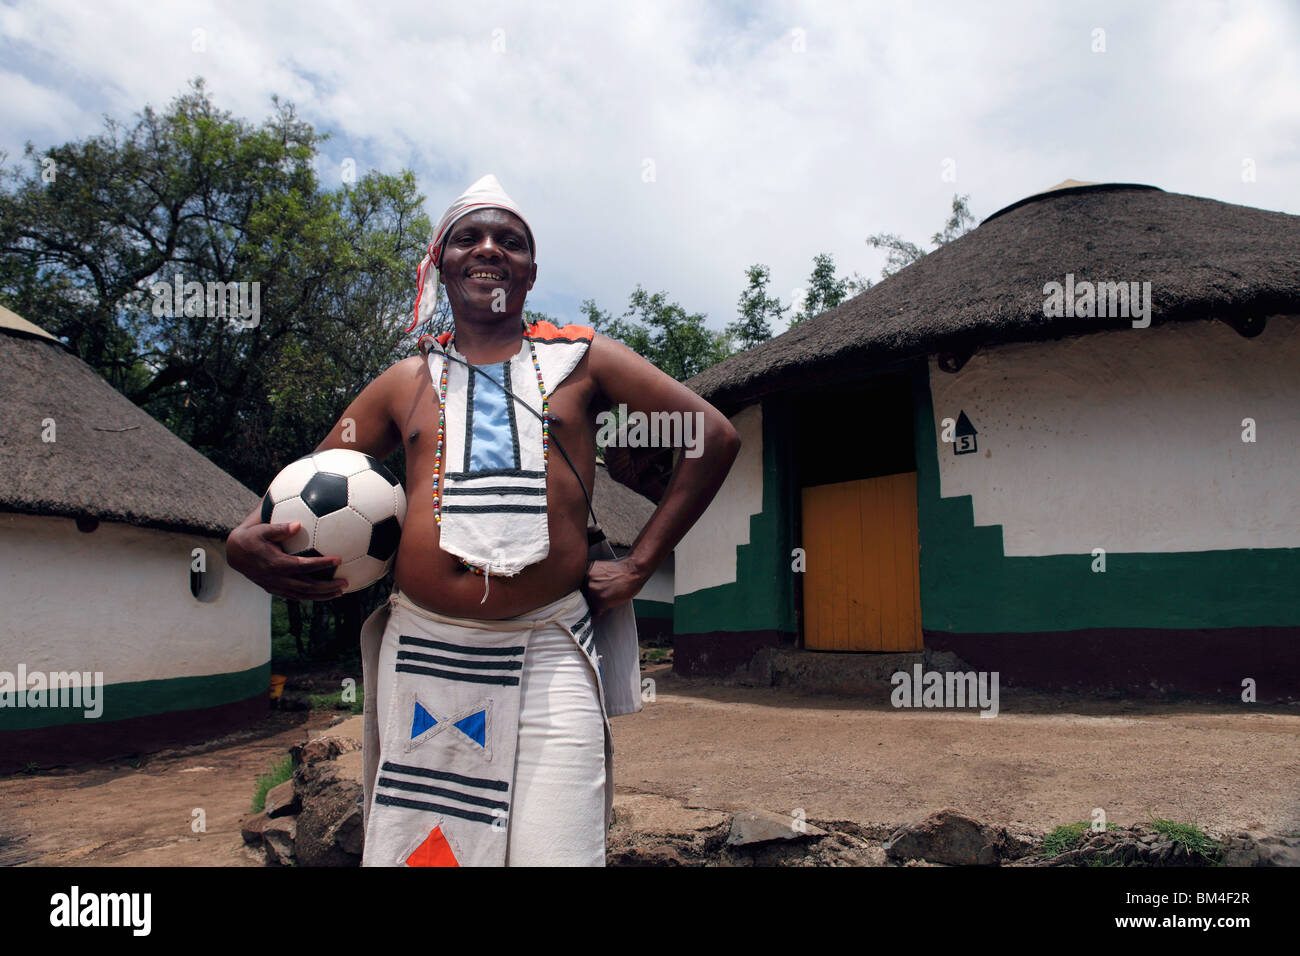 A tribal man of Xhosa origin wears traditional clothing while poses with a soccer ball in a traditional village in South Africa Stock Photo